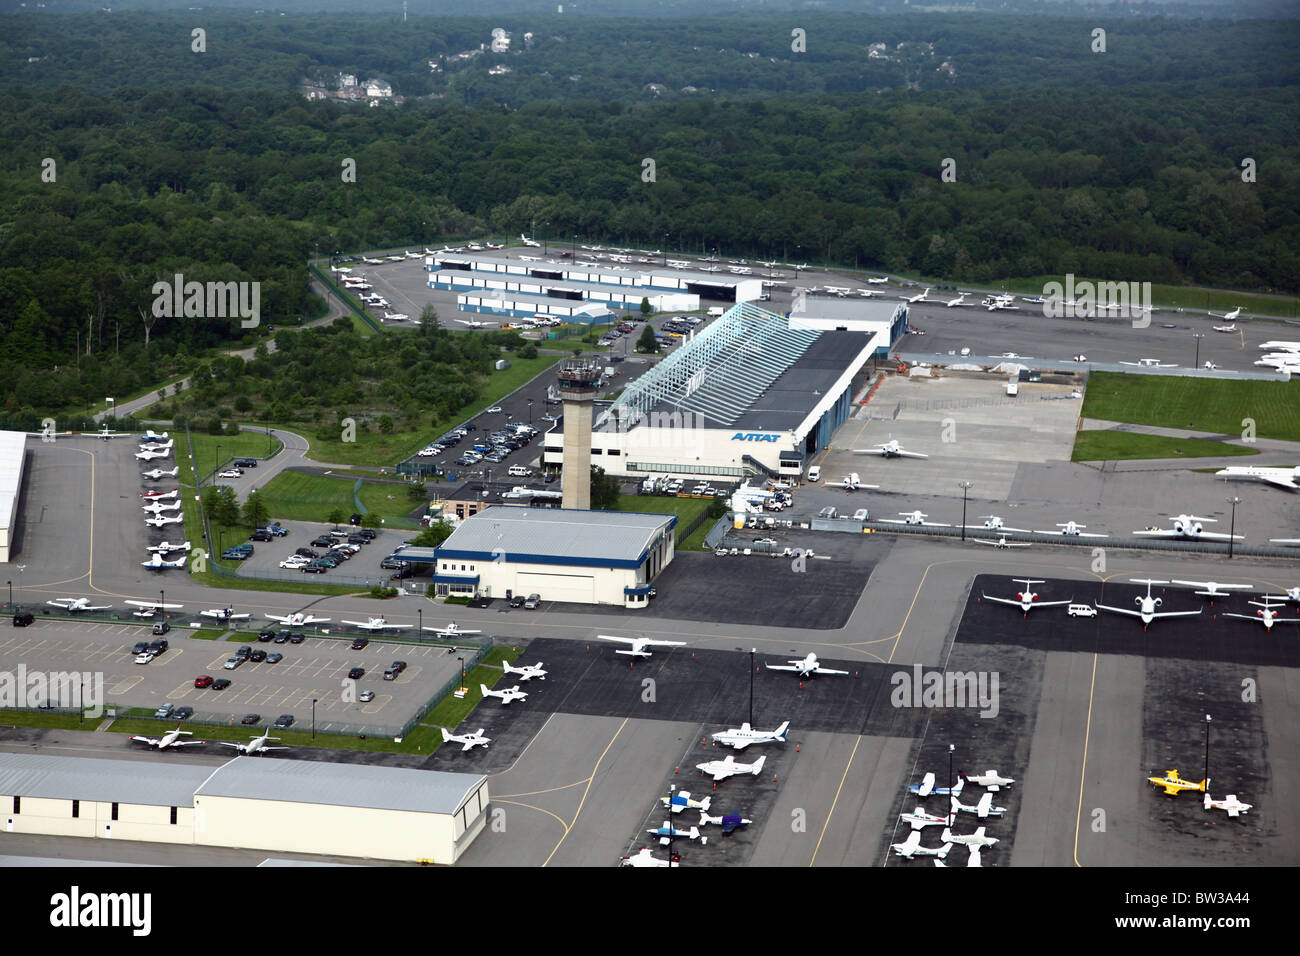 Aerial view of hangars, tarmac and control tower at Westchester County Airport, Harrison, NY, USA Stock Photo